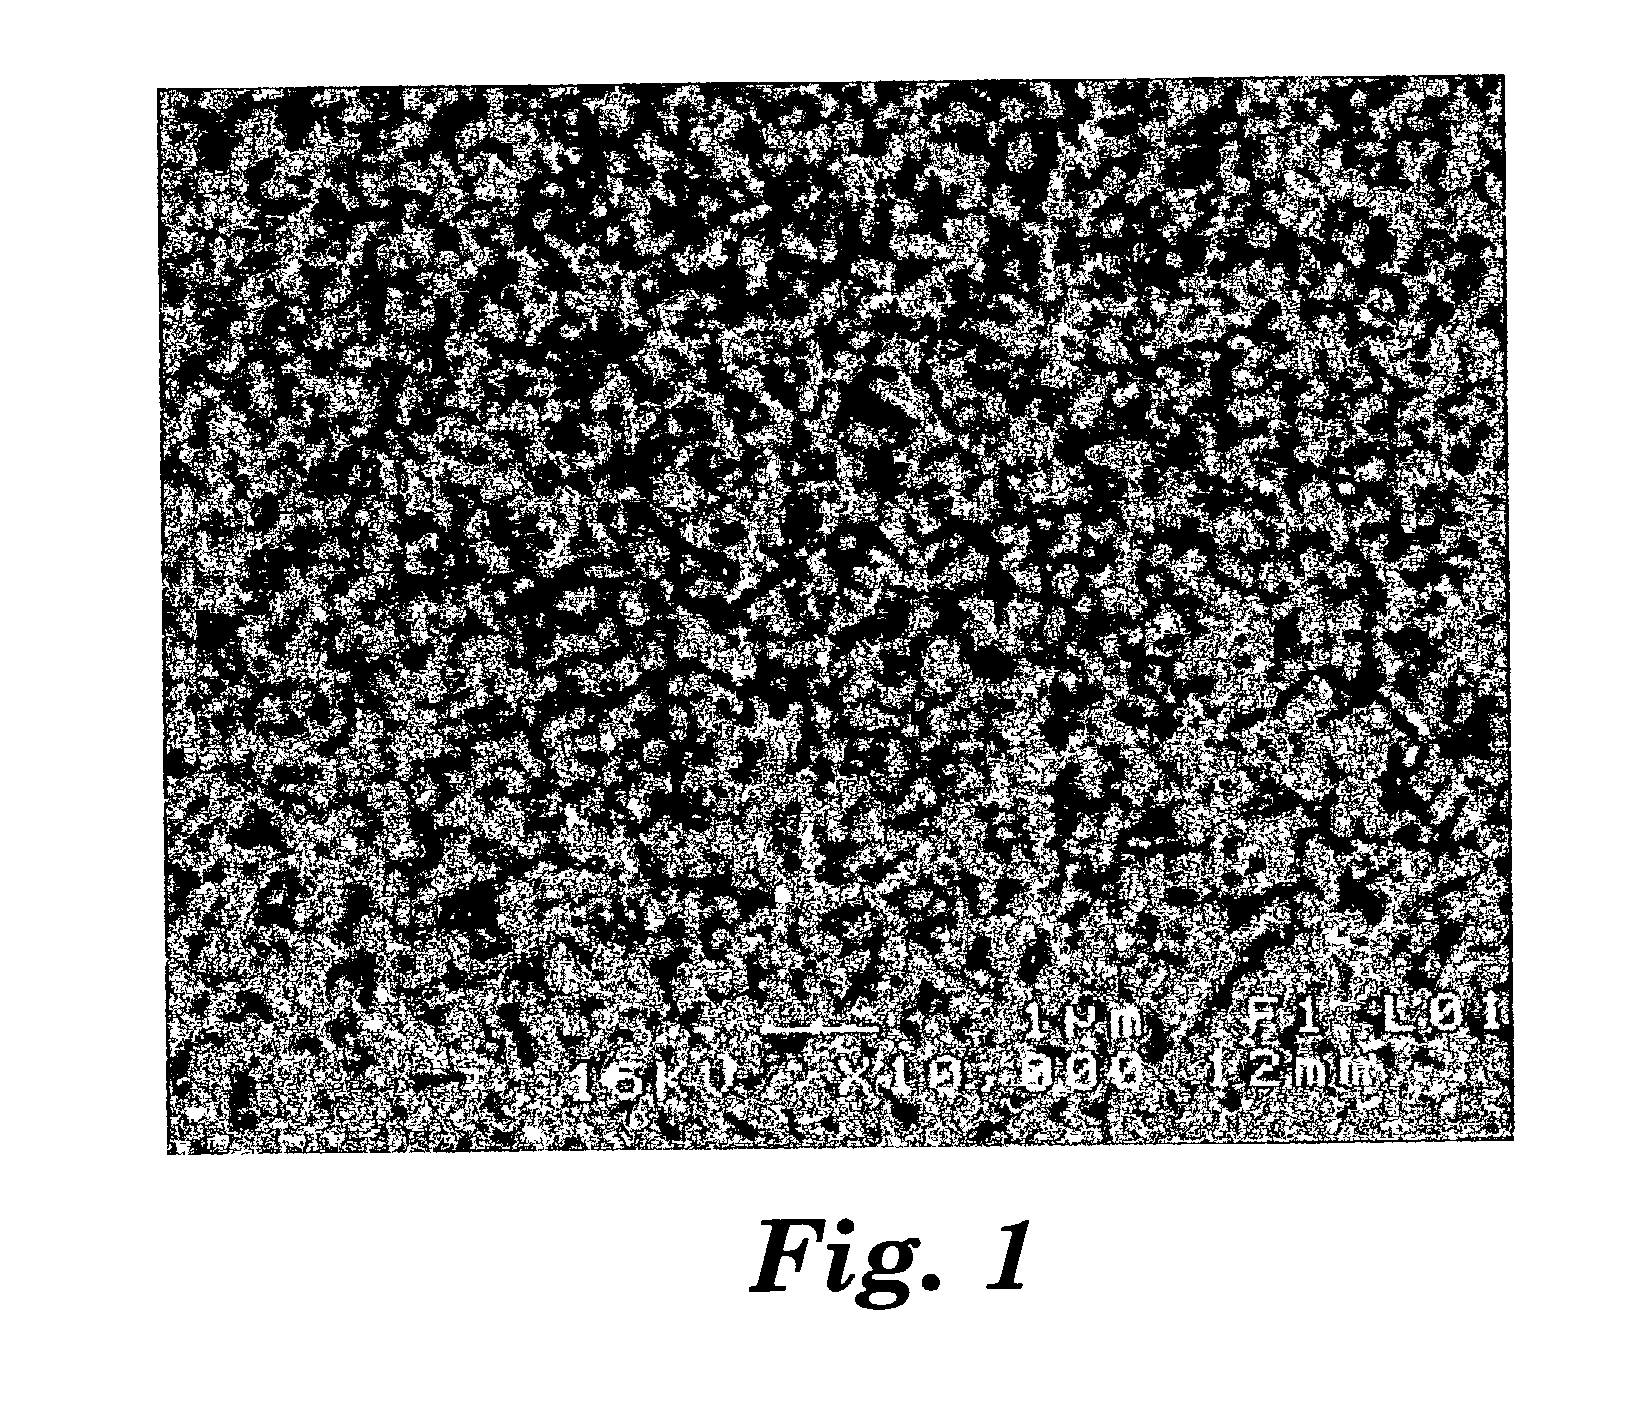 Al2O3-Y2O3-ZrO2/HfO2 materials, and methods of making and using the same